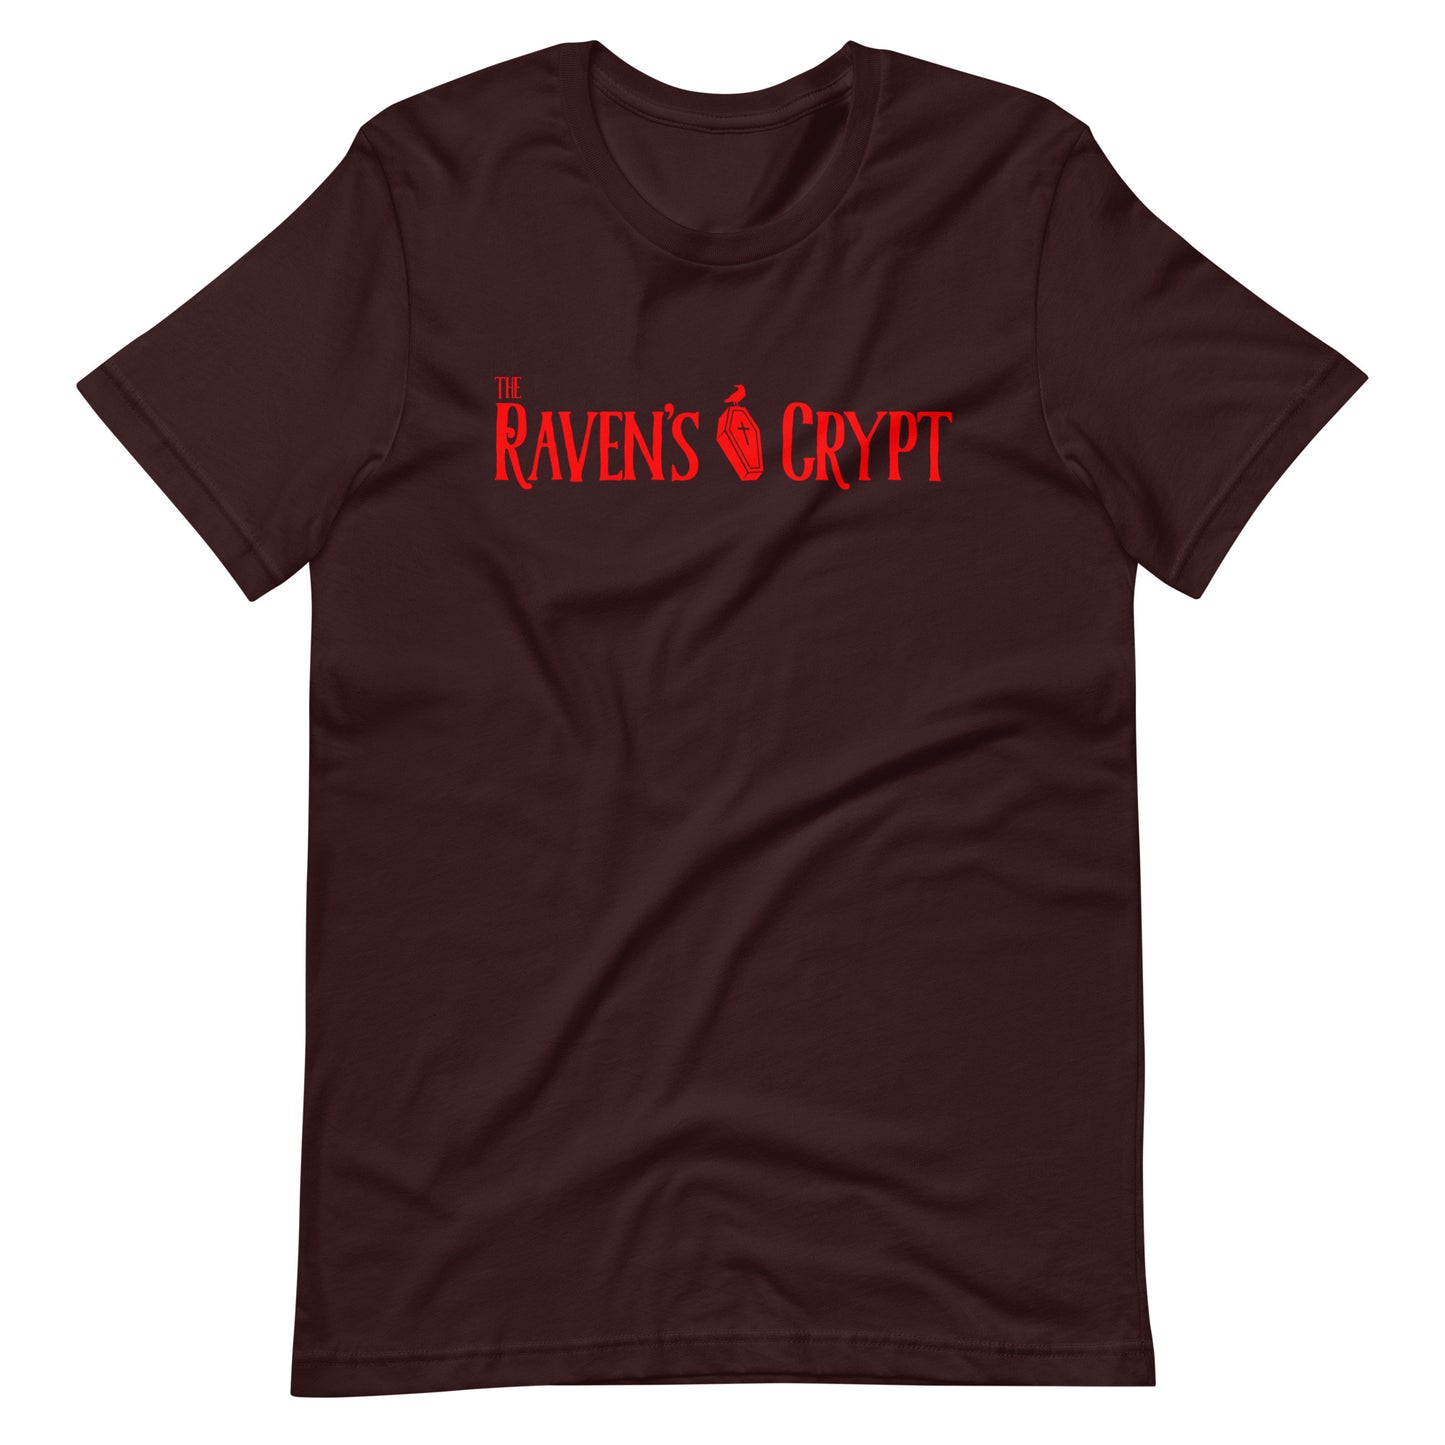 The Raven's Crypt Red Logo - Unisex t-shirt - Oxblood Black Front